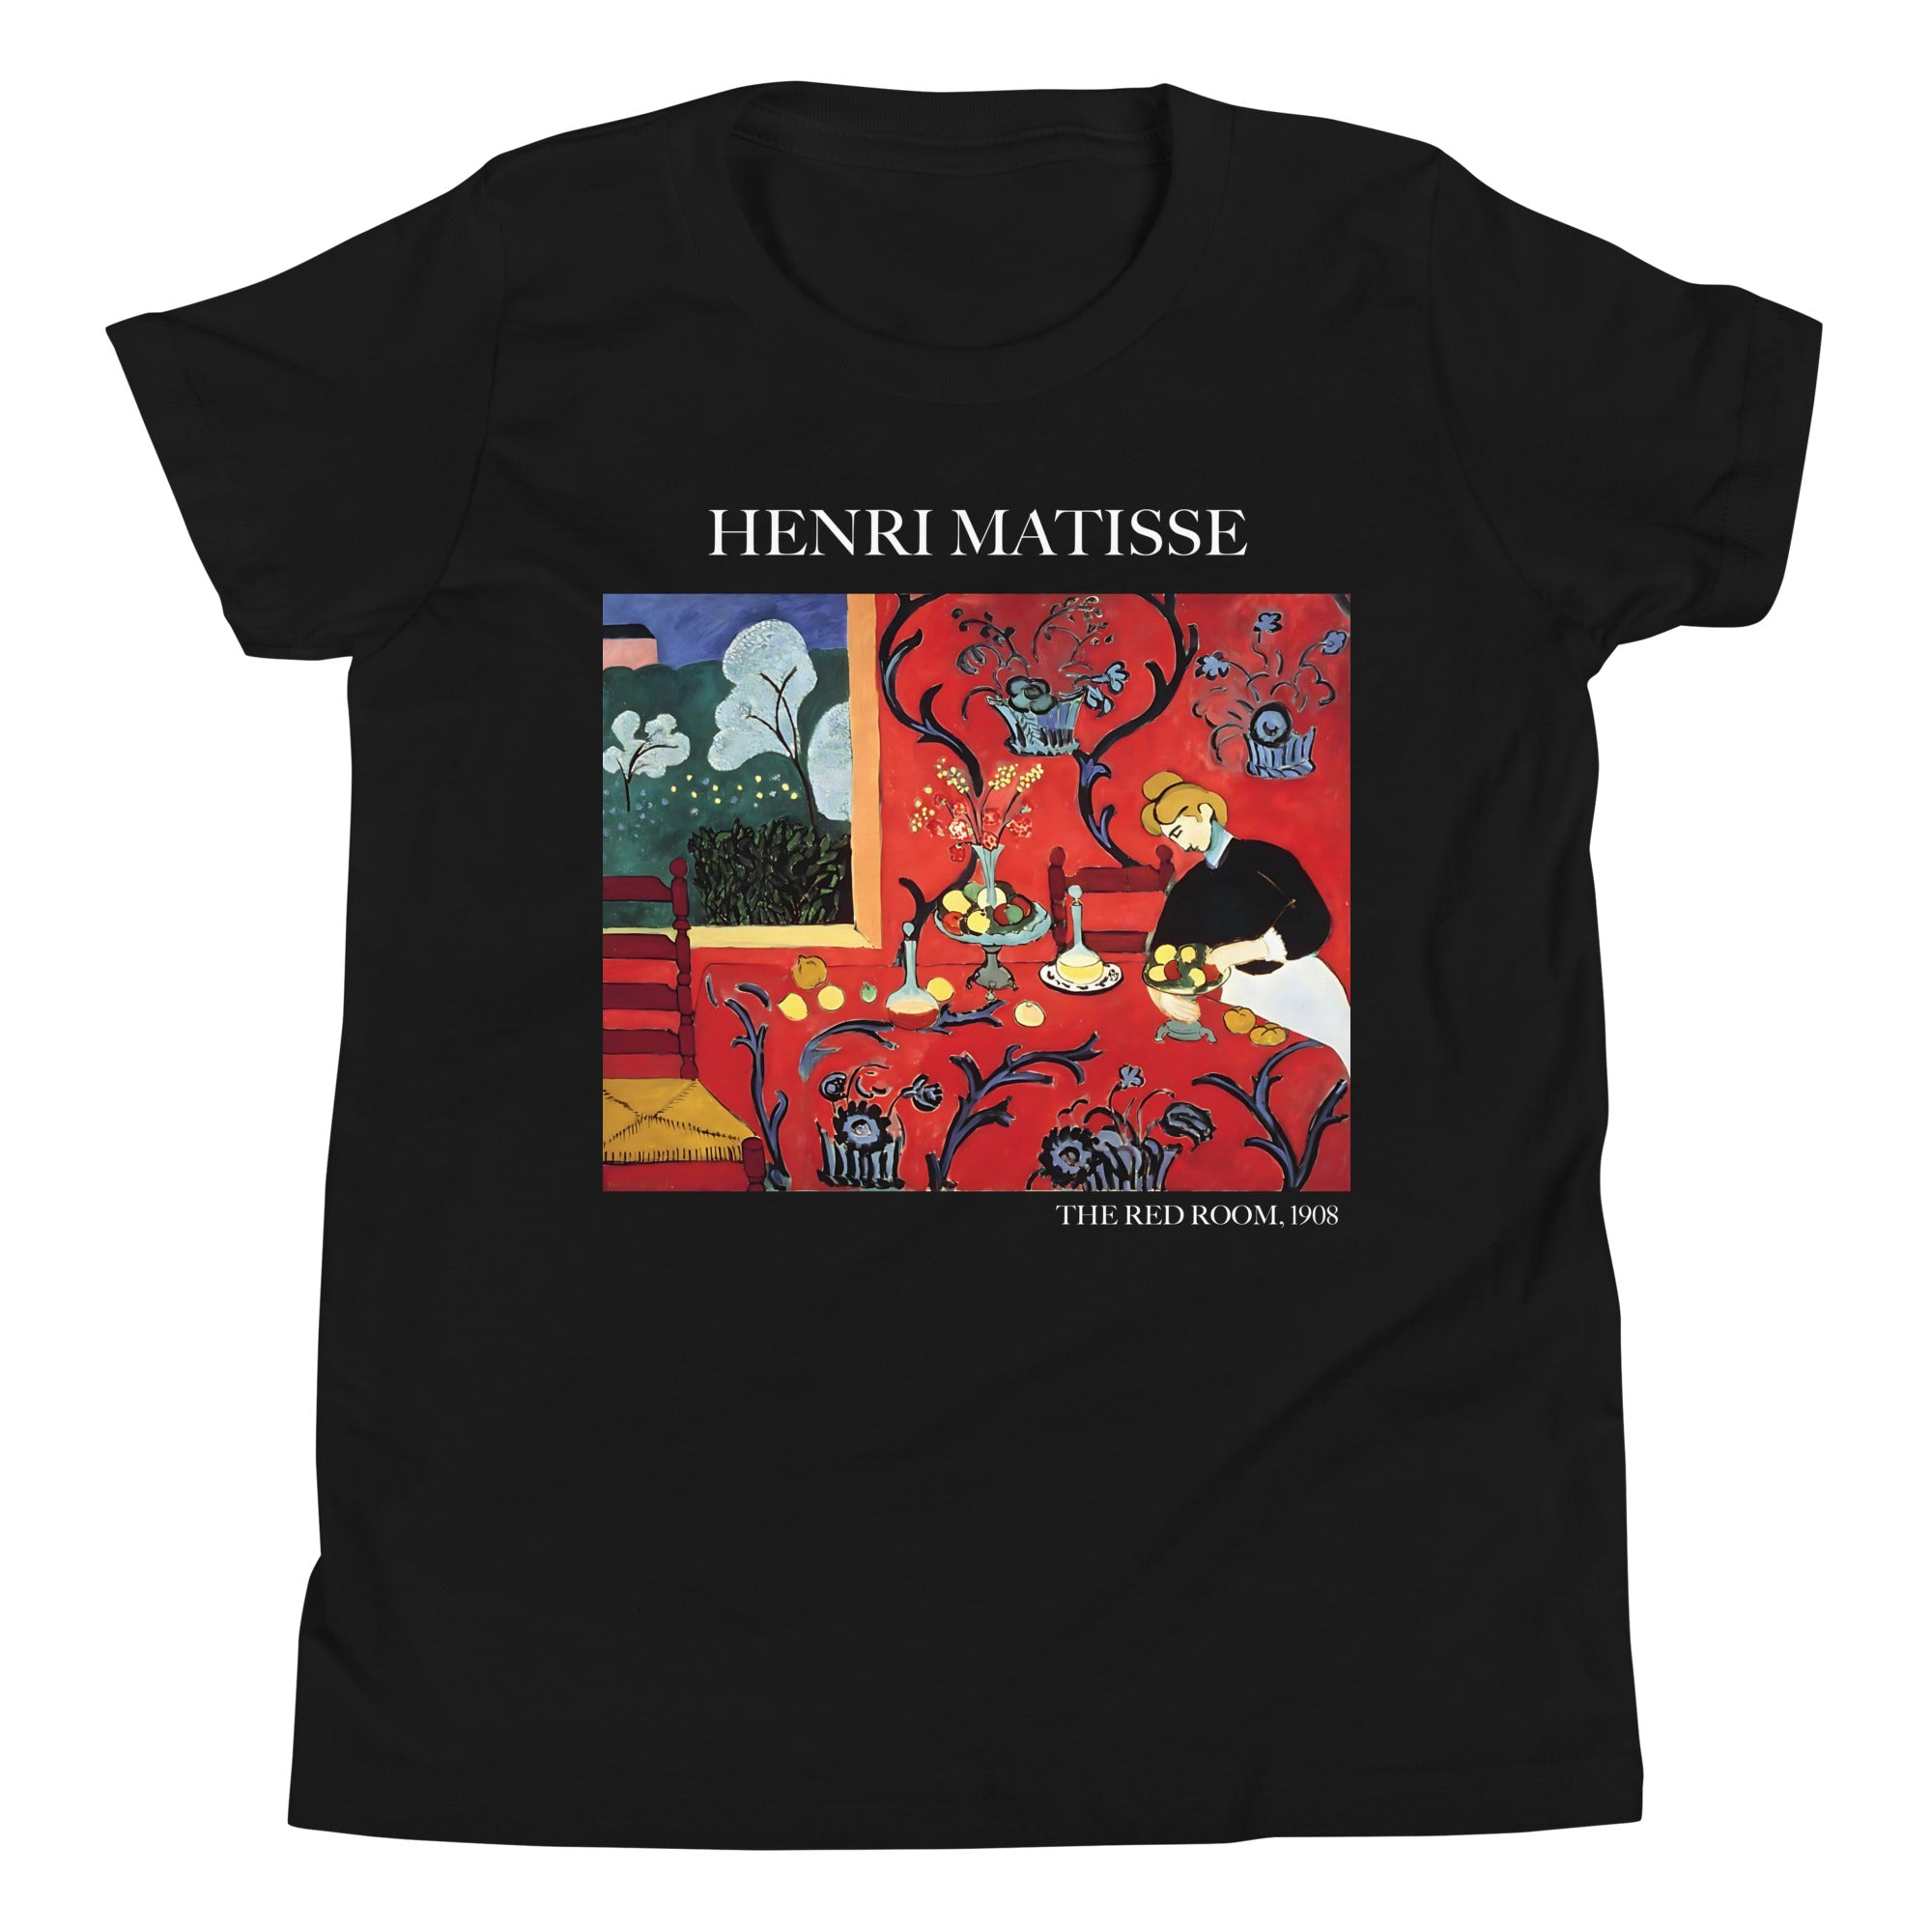 Henri Matisse 'The Red Room' Famous Painting Short Sleeve T-Shirt | Premium Youth Art Tee